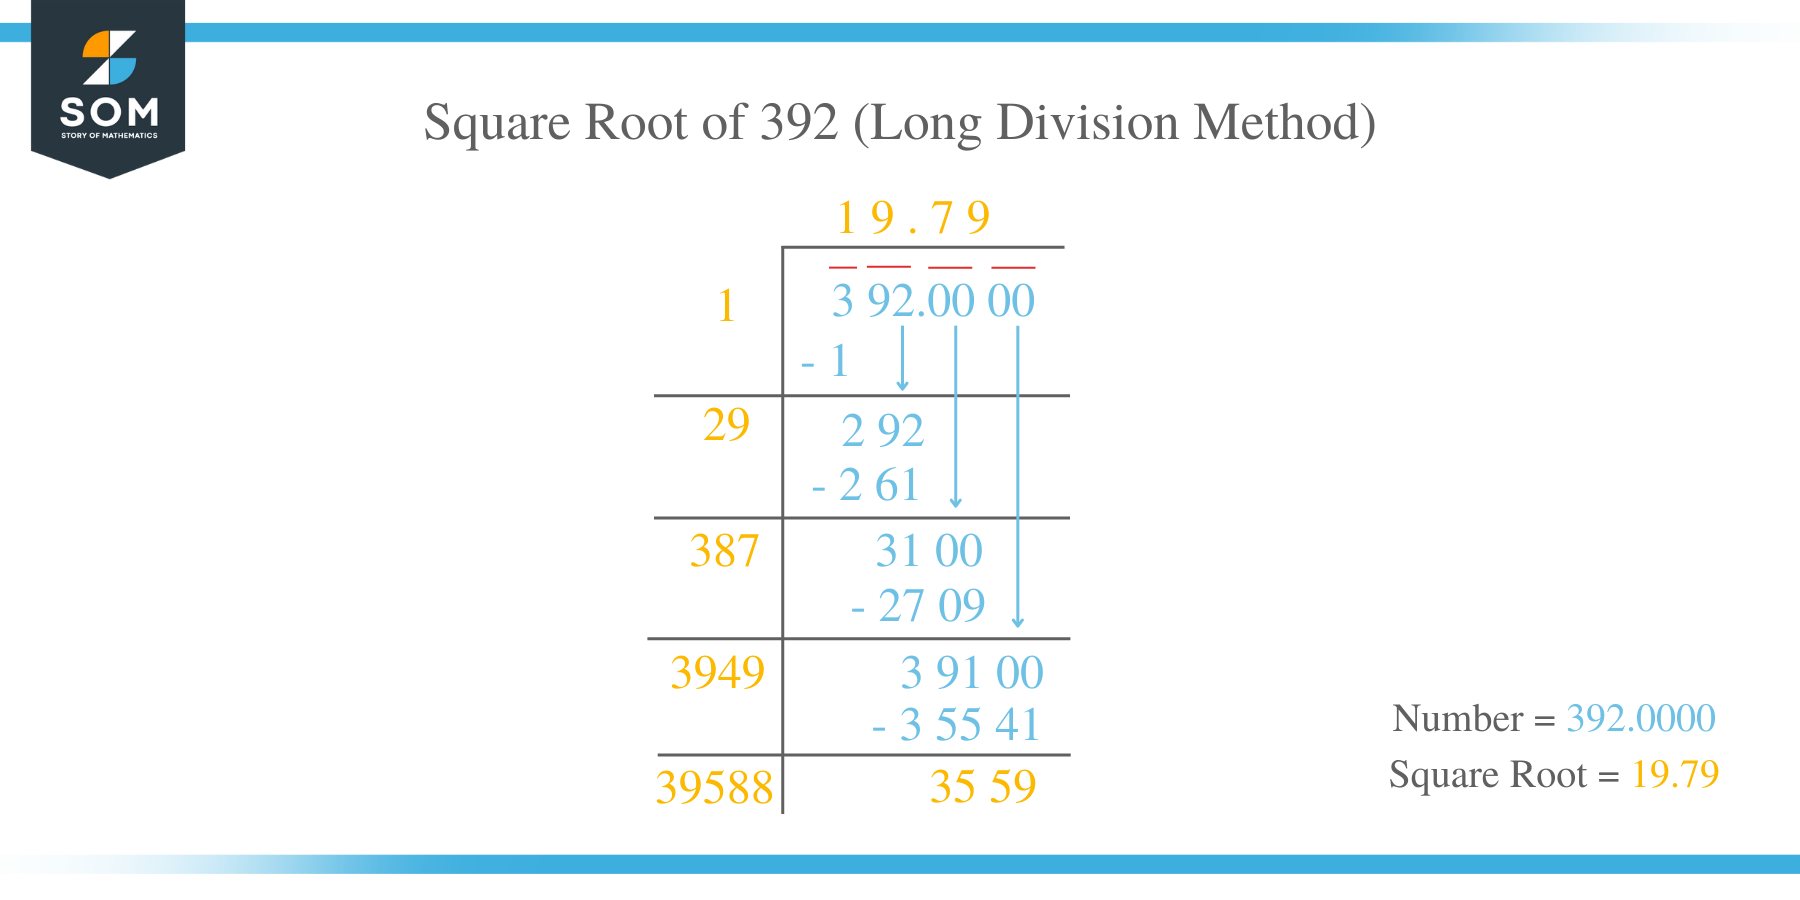 Square Root of 392 by Long Division Method